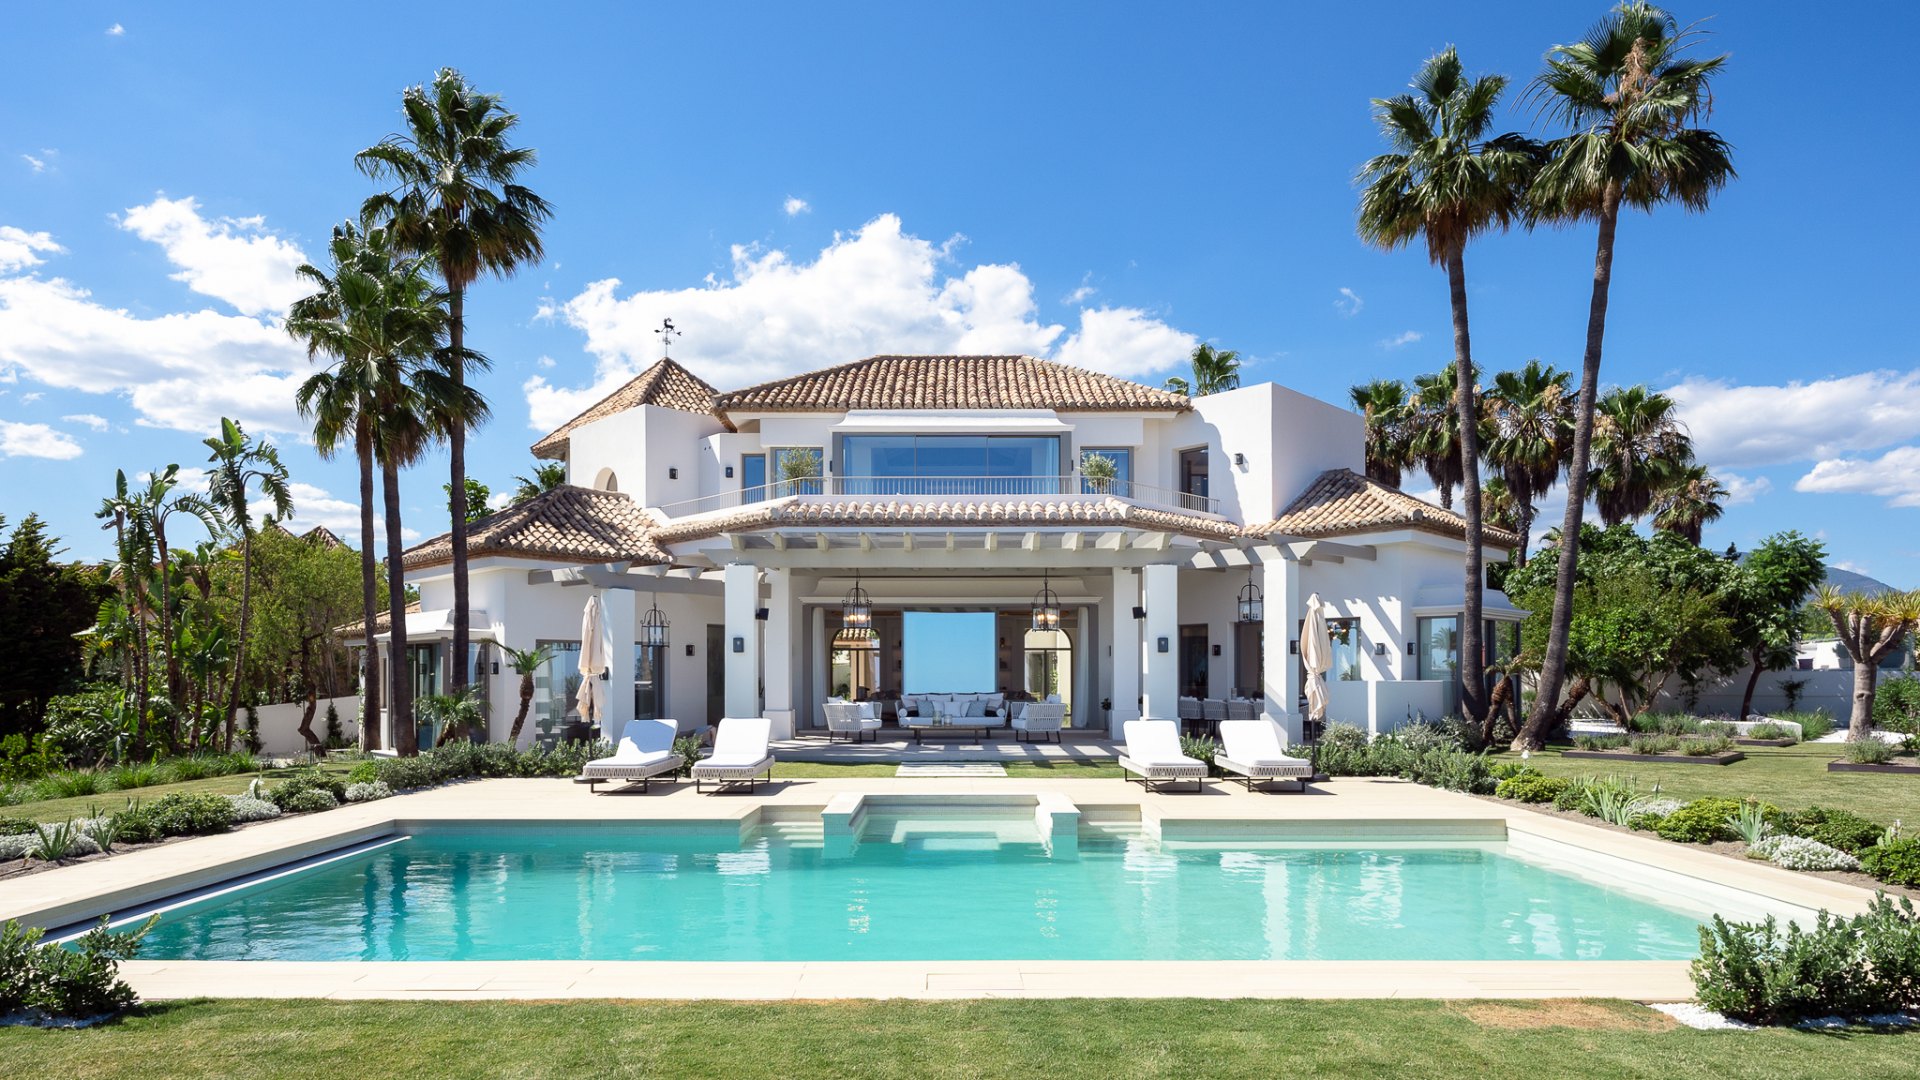 Luxury villa with the most amazing view in La Quinta